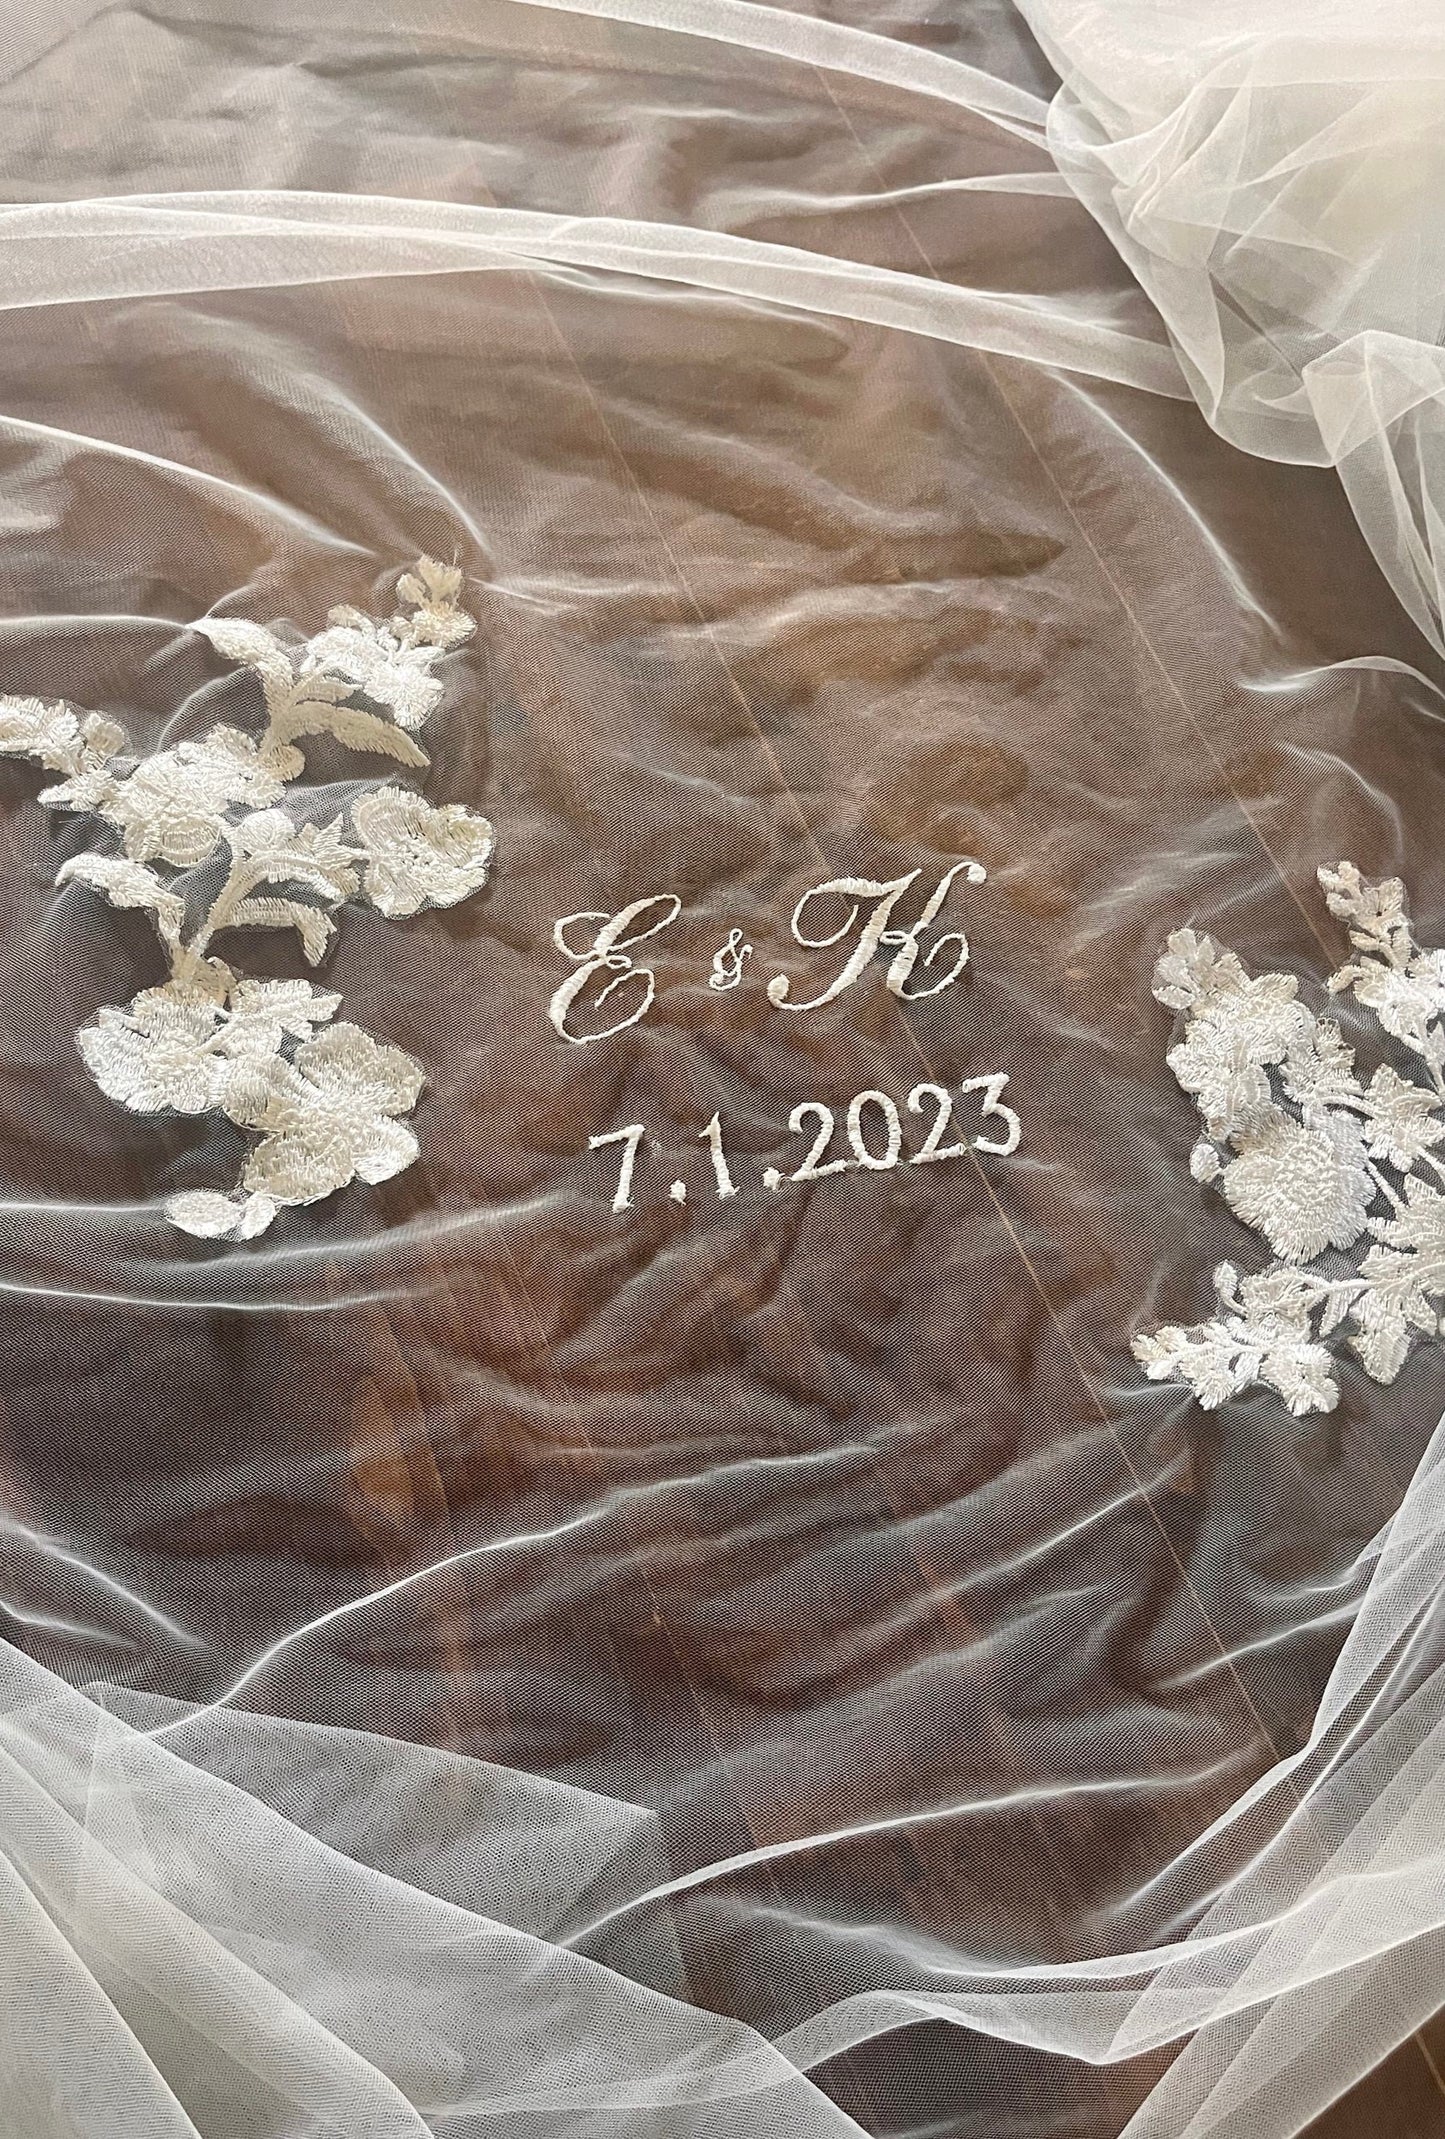 romantic script embroidery of engaged couple's initials and wedding date on a unity veil in white tulle